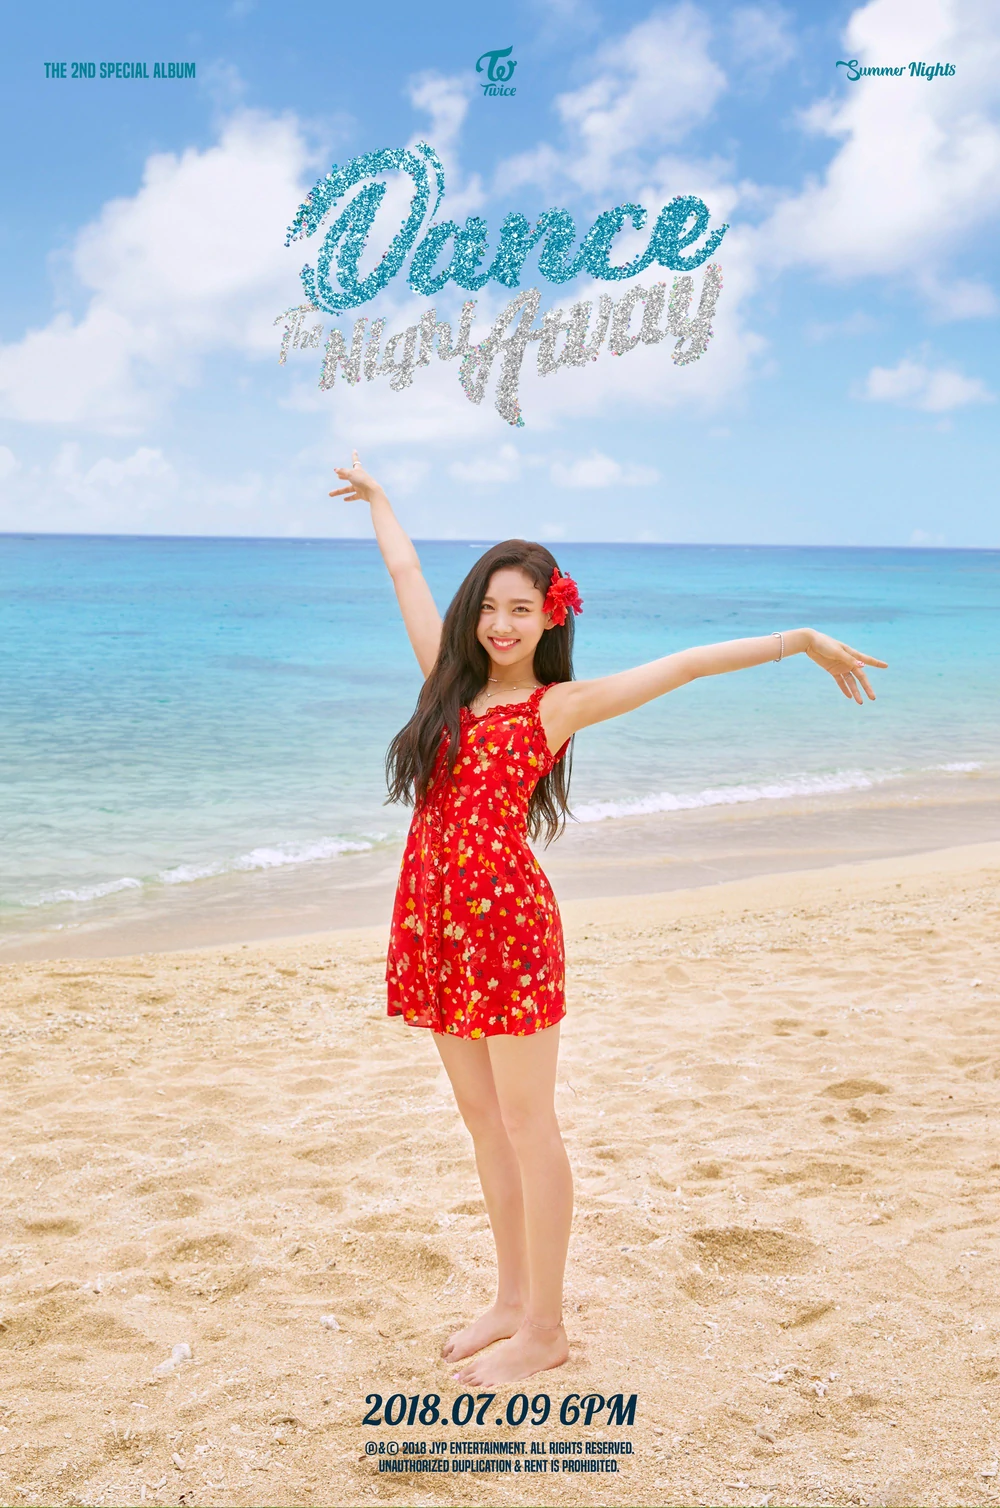 Twice Summer Nights Nayeon Concept Teaser Picture Image Photo Kpop K-Concept 4